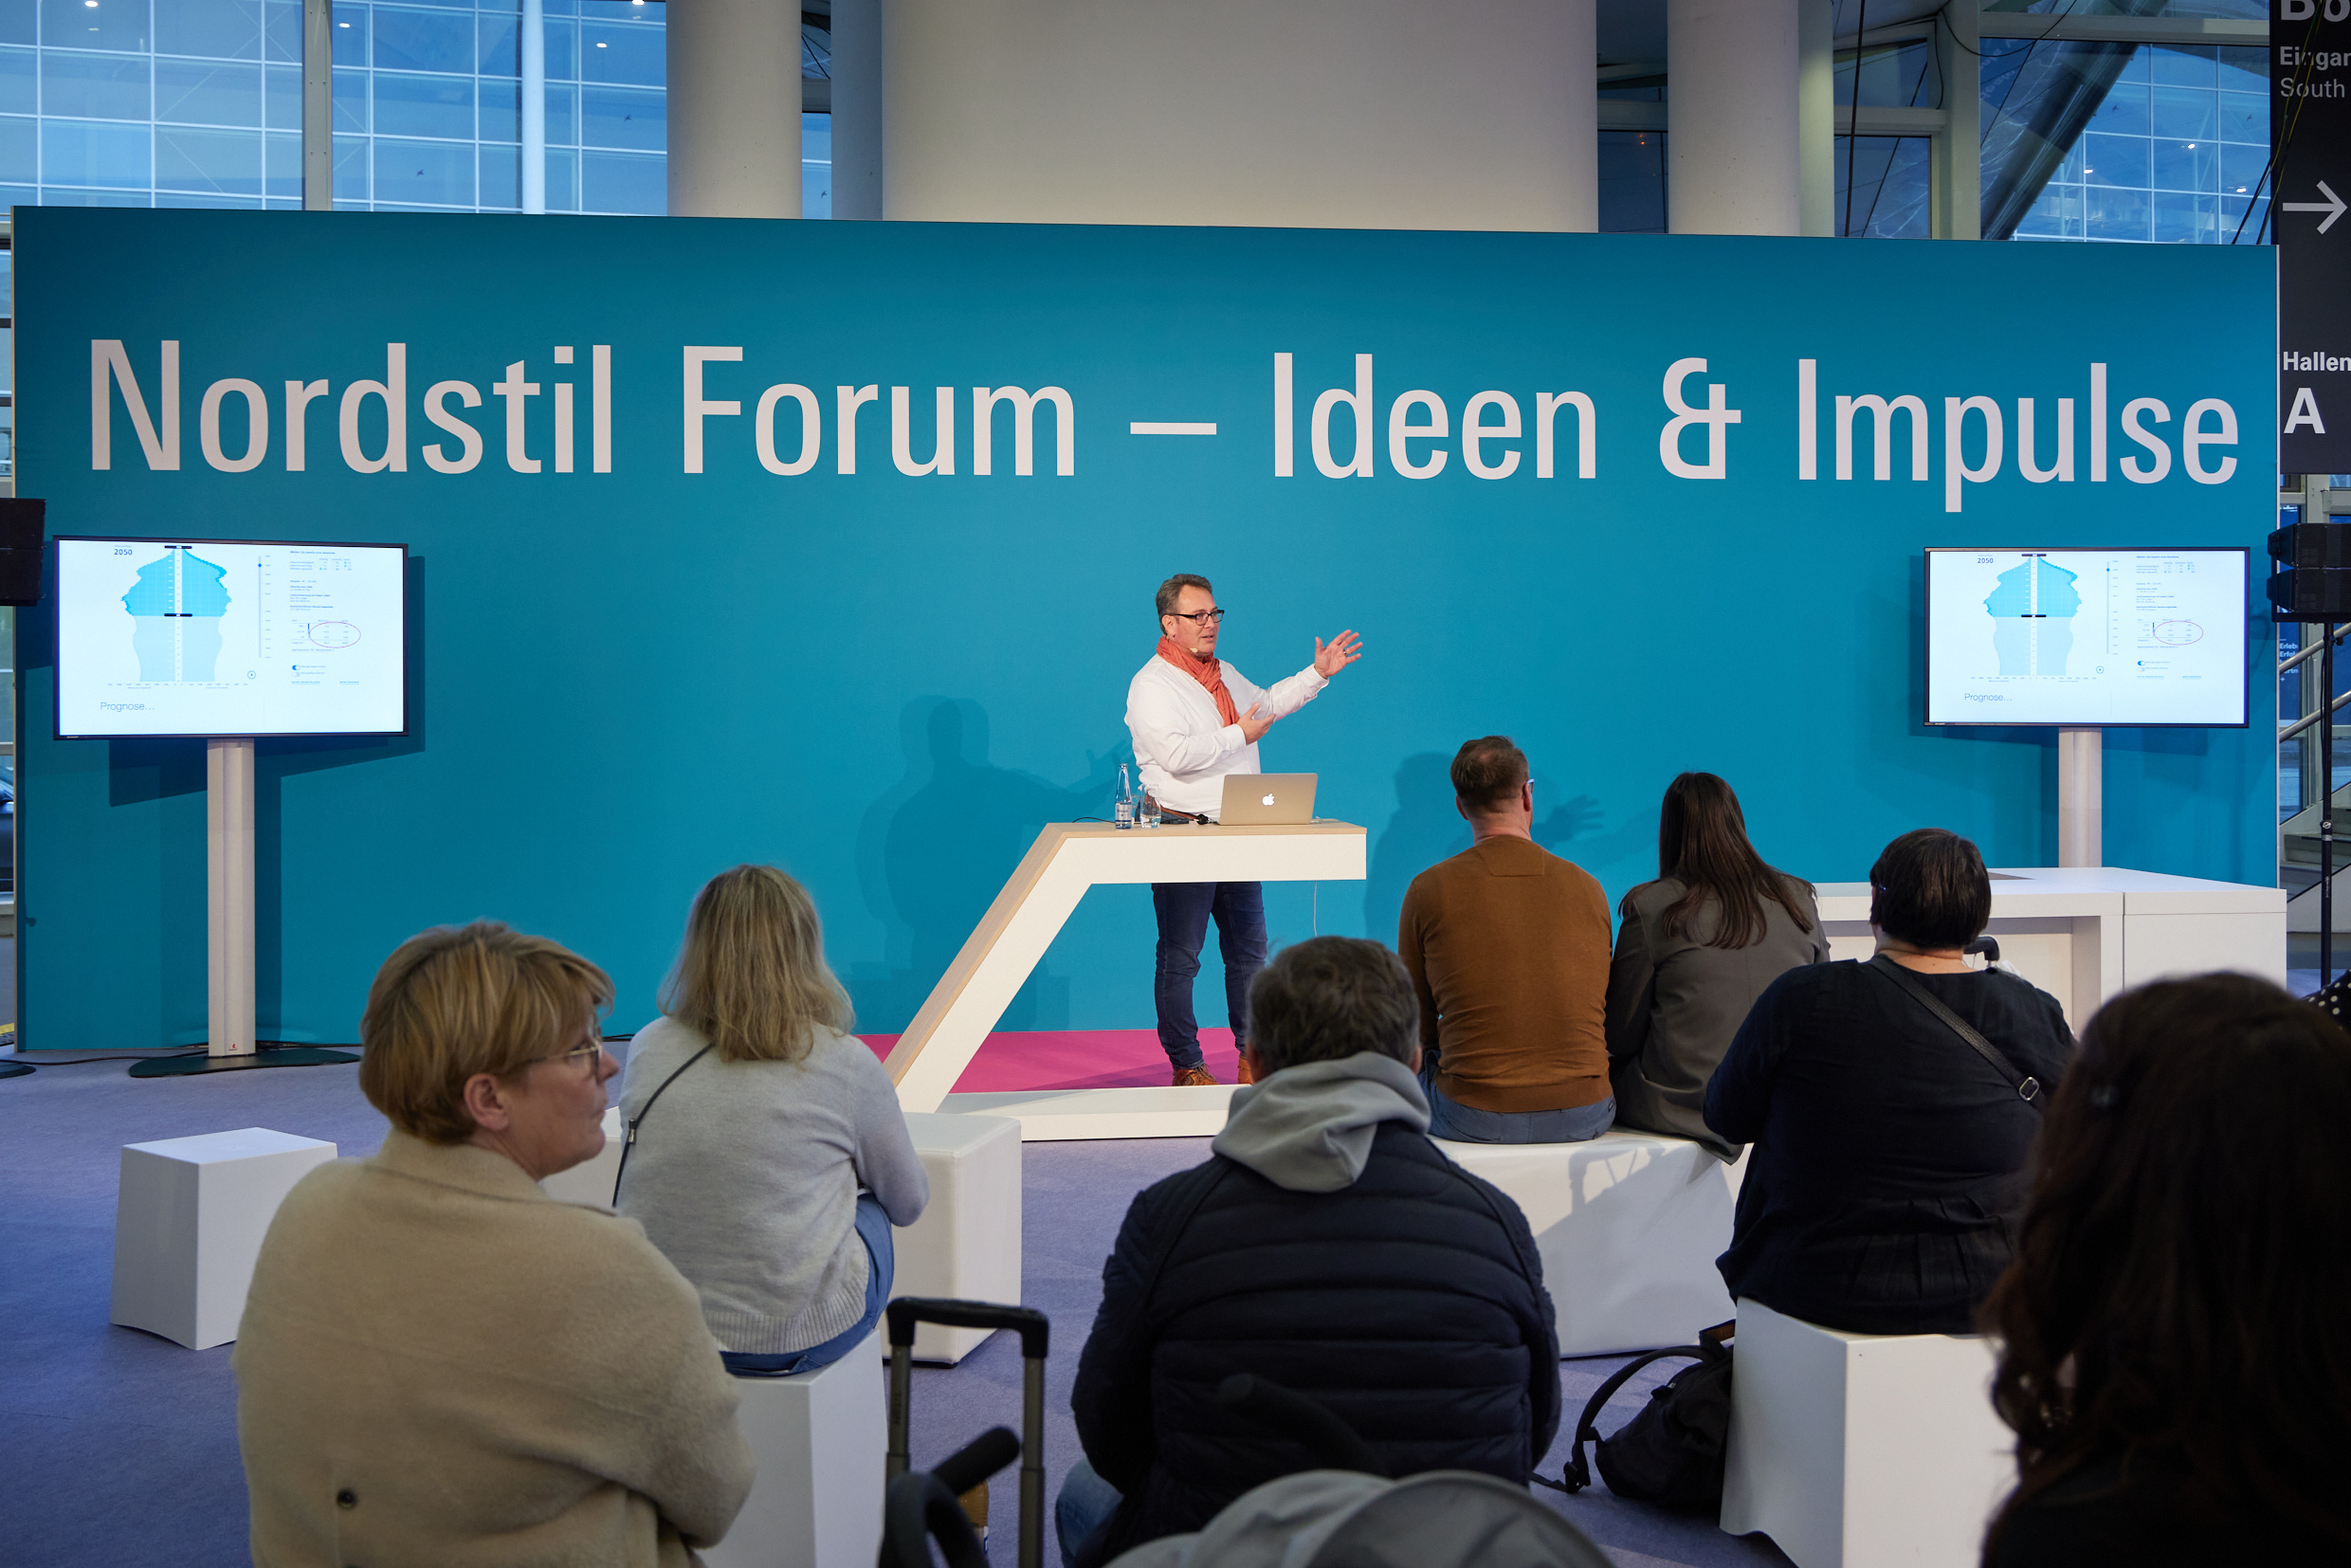 Expert lectures, workshops and practical tips are provided by the Nordstil Forum on all three days of the fair.